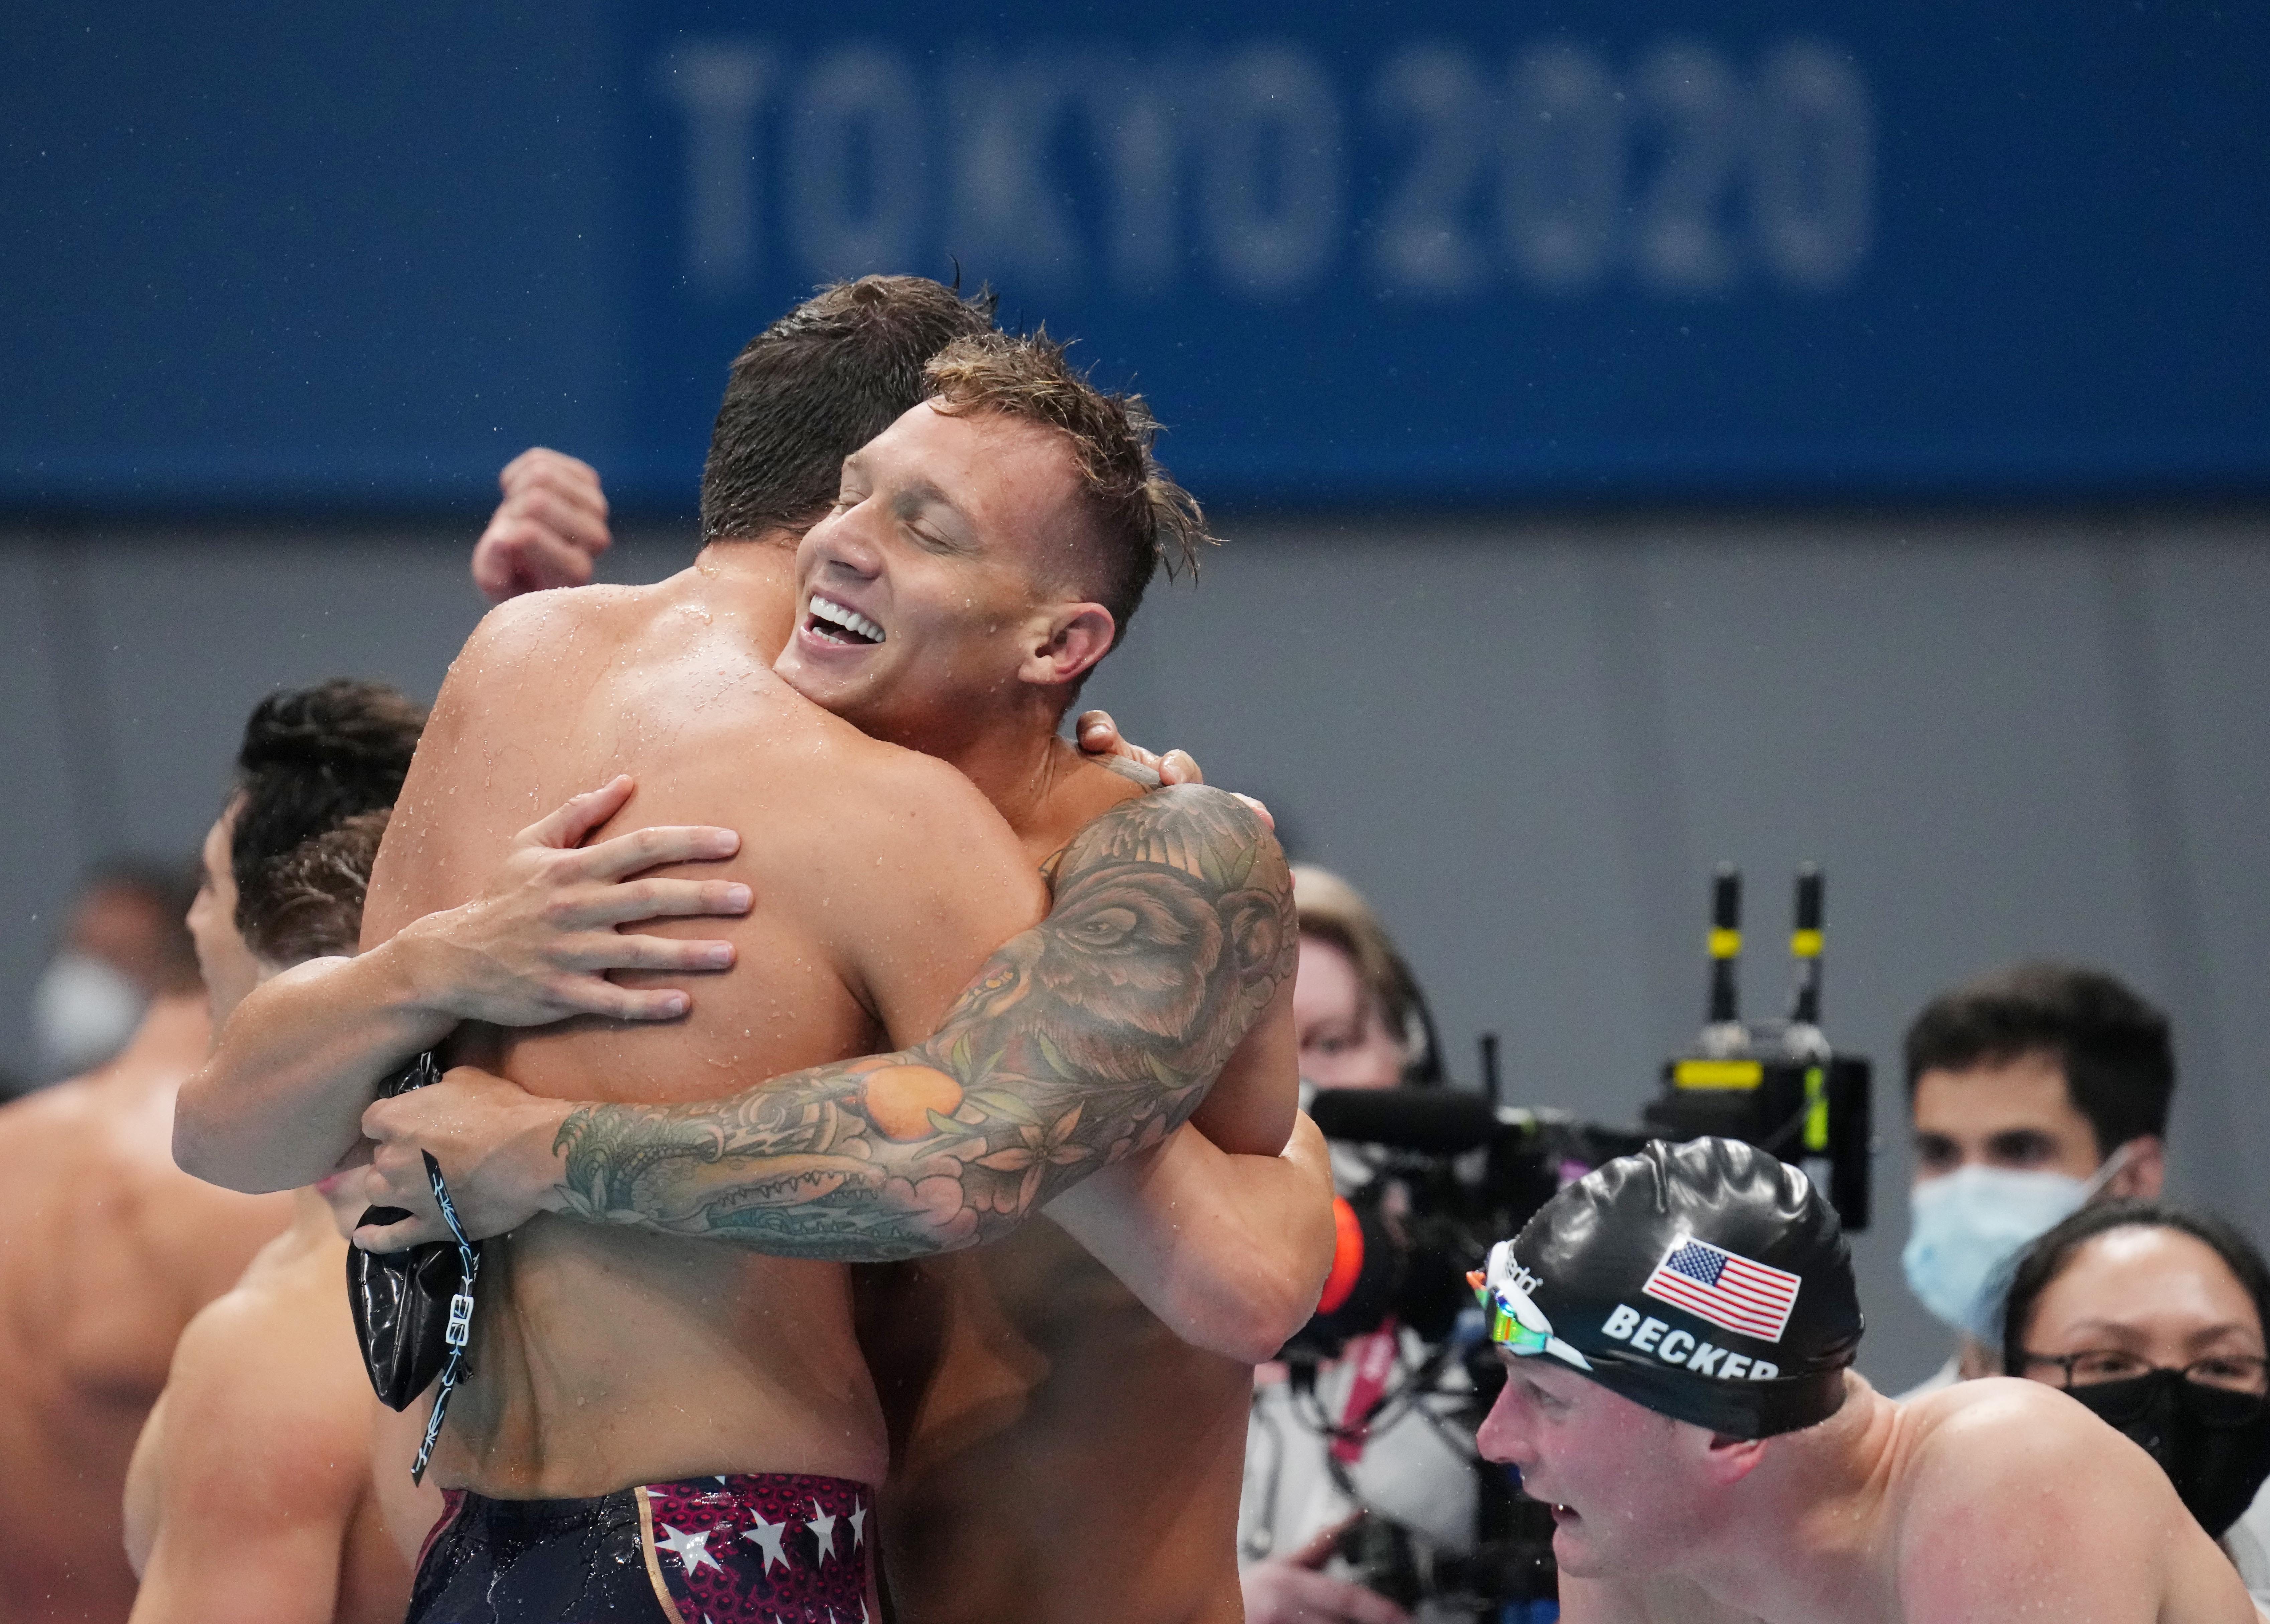 Zach Apple (USA) celebrates with Caeleb Dressel (USA) after winning the men's 4x100m freestyle relay final during the Tokyo 2020 Olympic Summer Games at Tokyo Aquatics Centre on July 26, 2021.